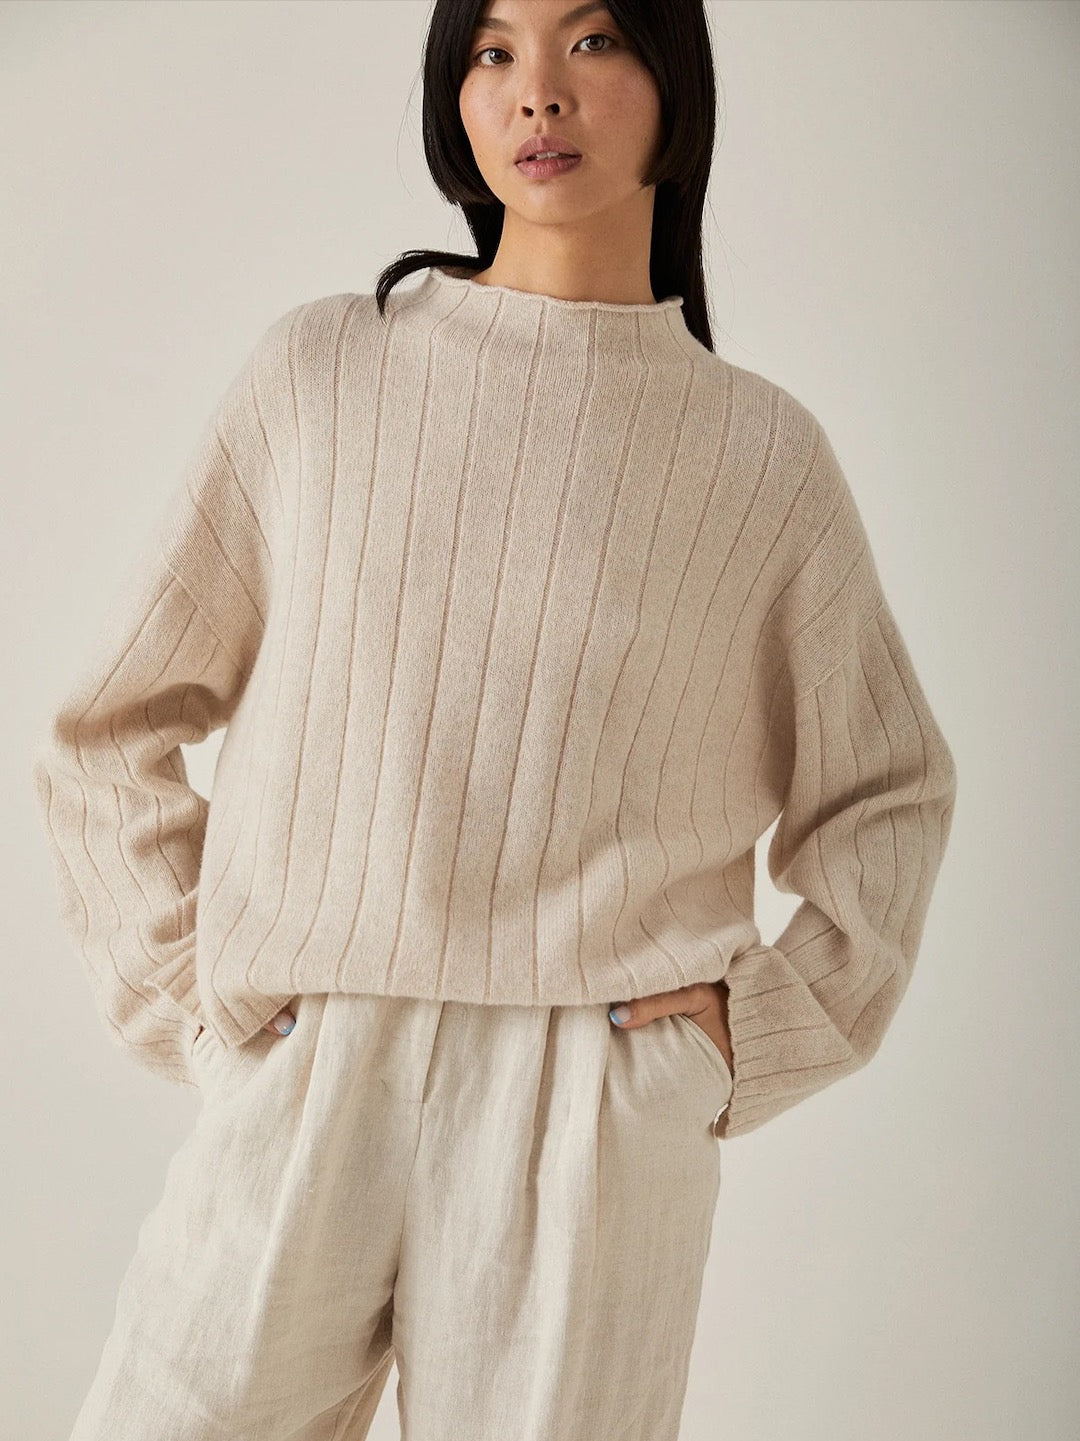 The model is wearing an oversized Francie Echo Knit - Creme sweater and white pants.